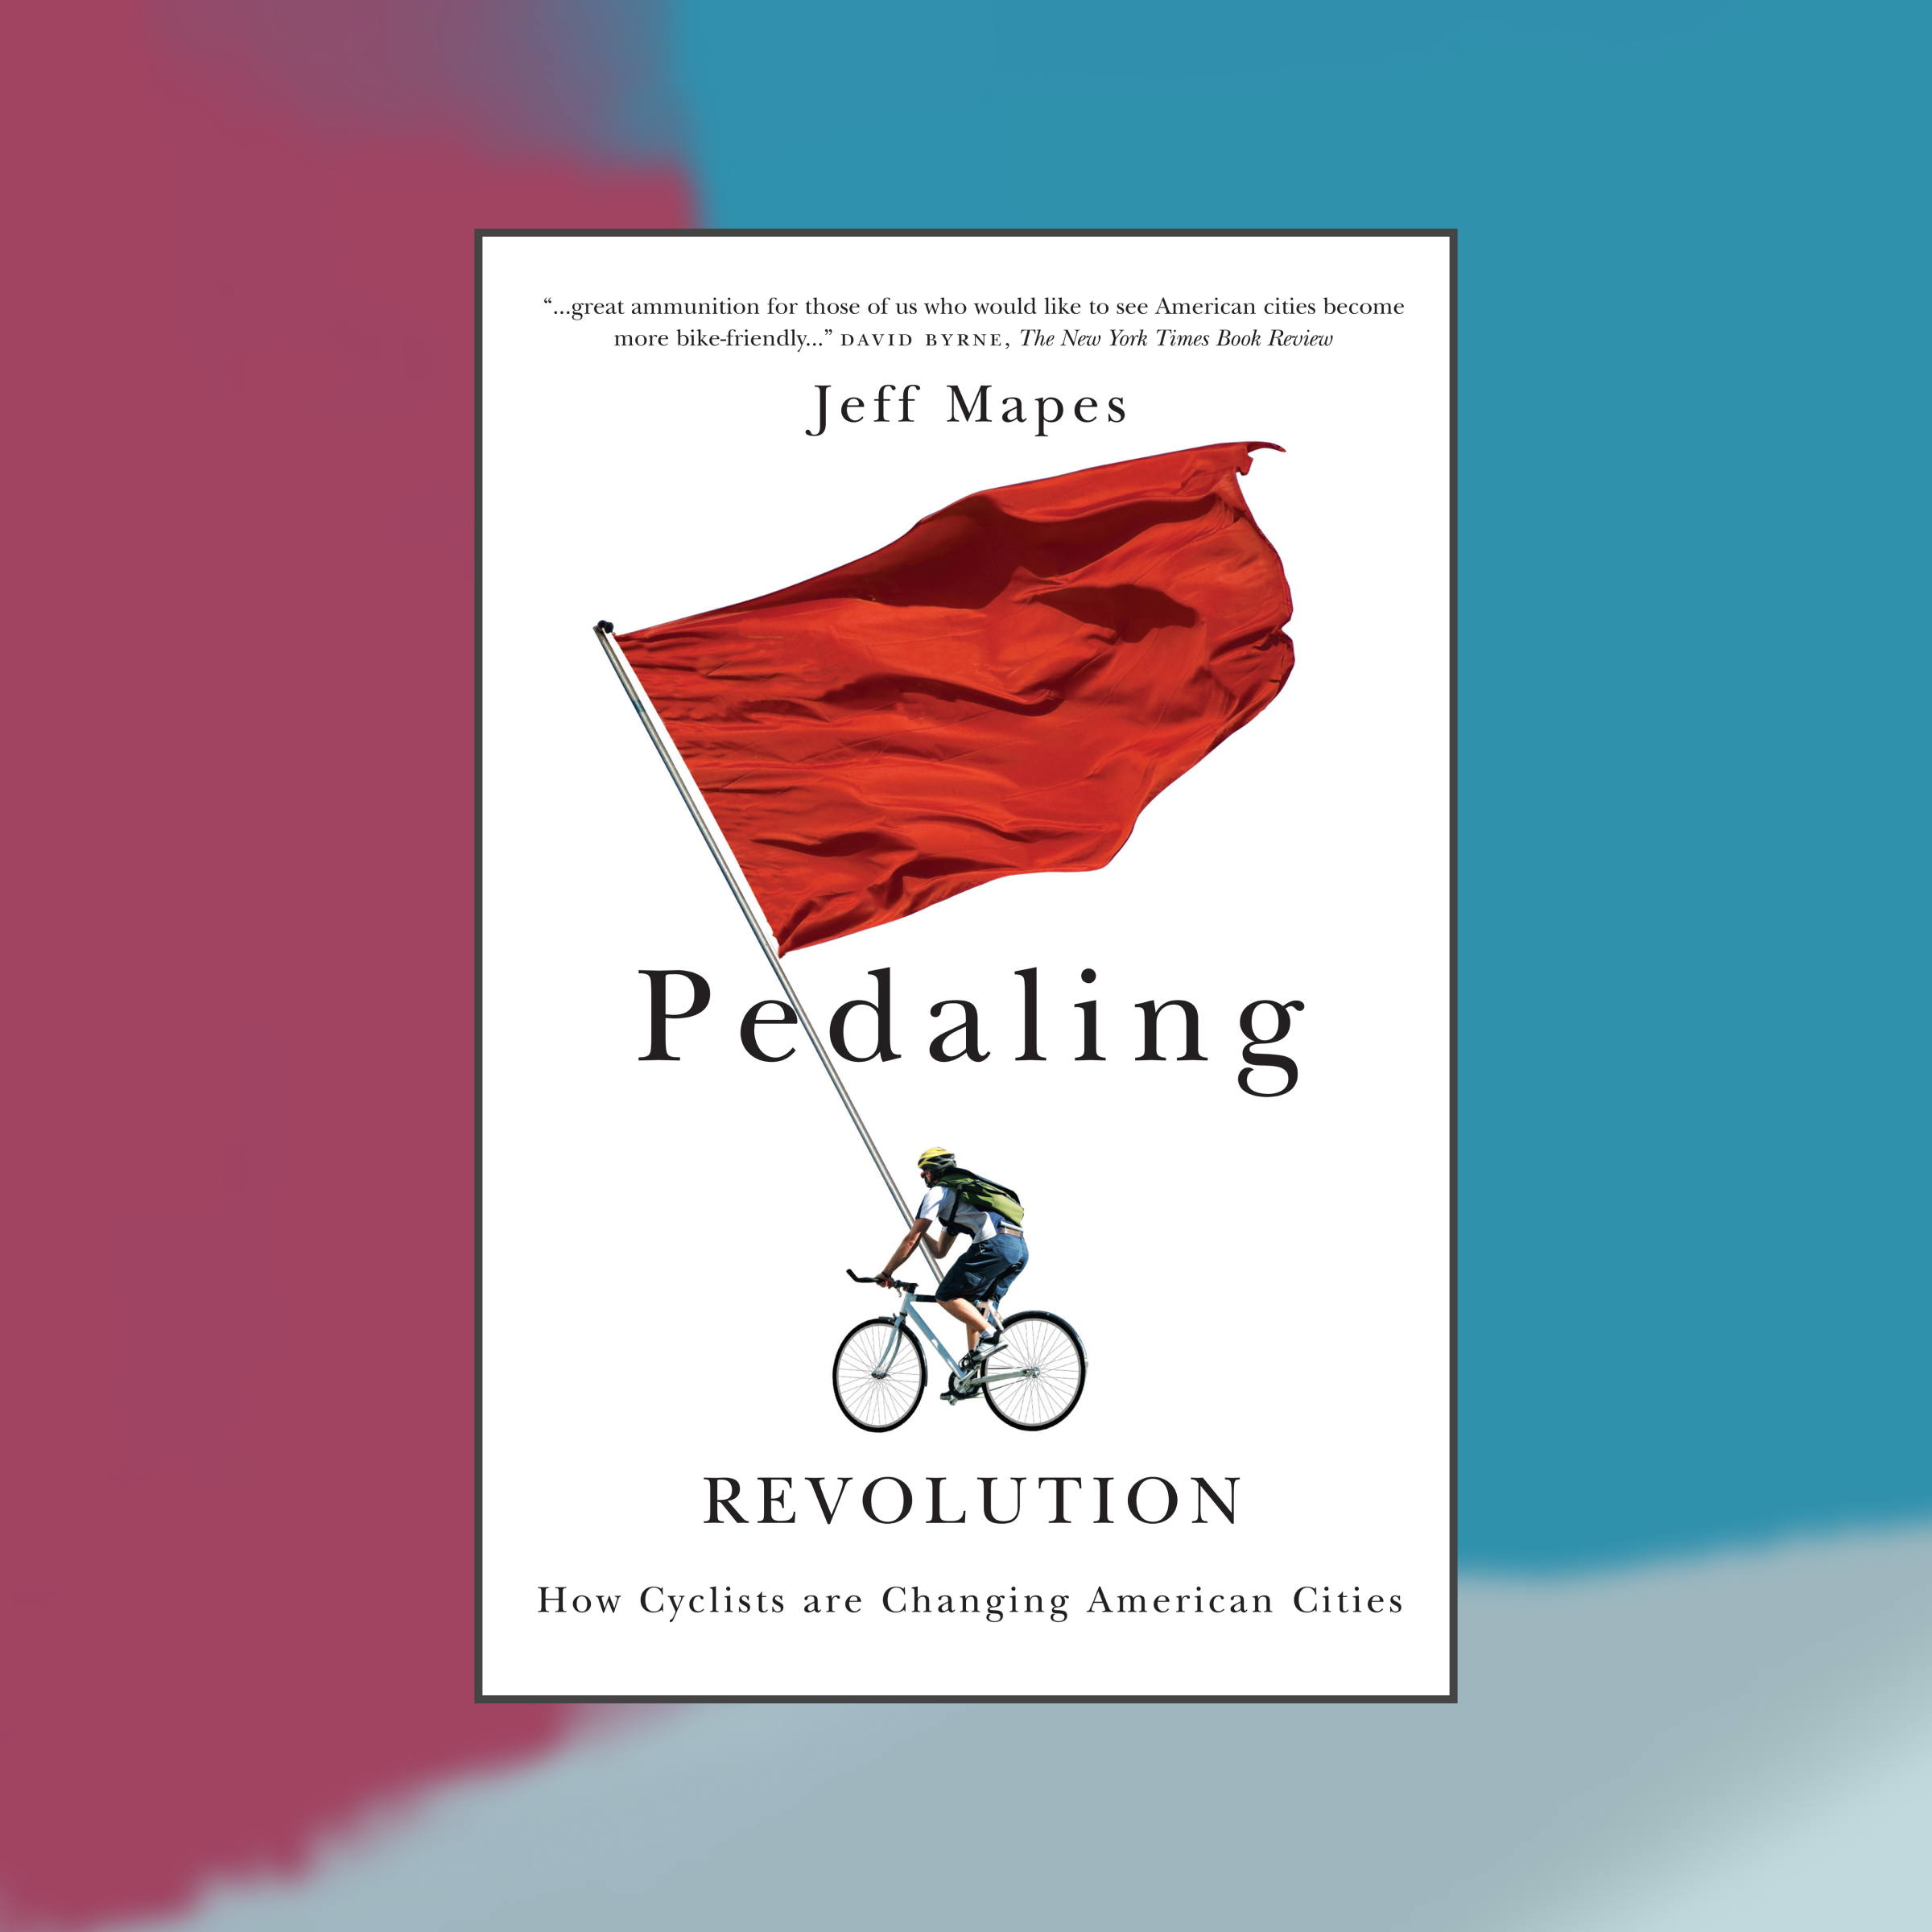 Book cover of Pedaling Revolution against an abstract painted background